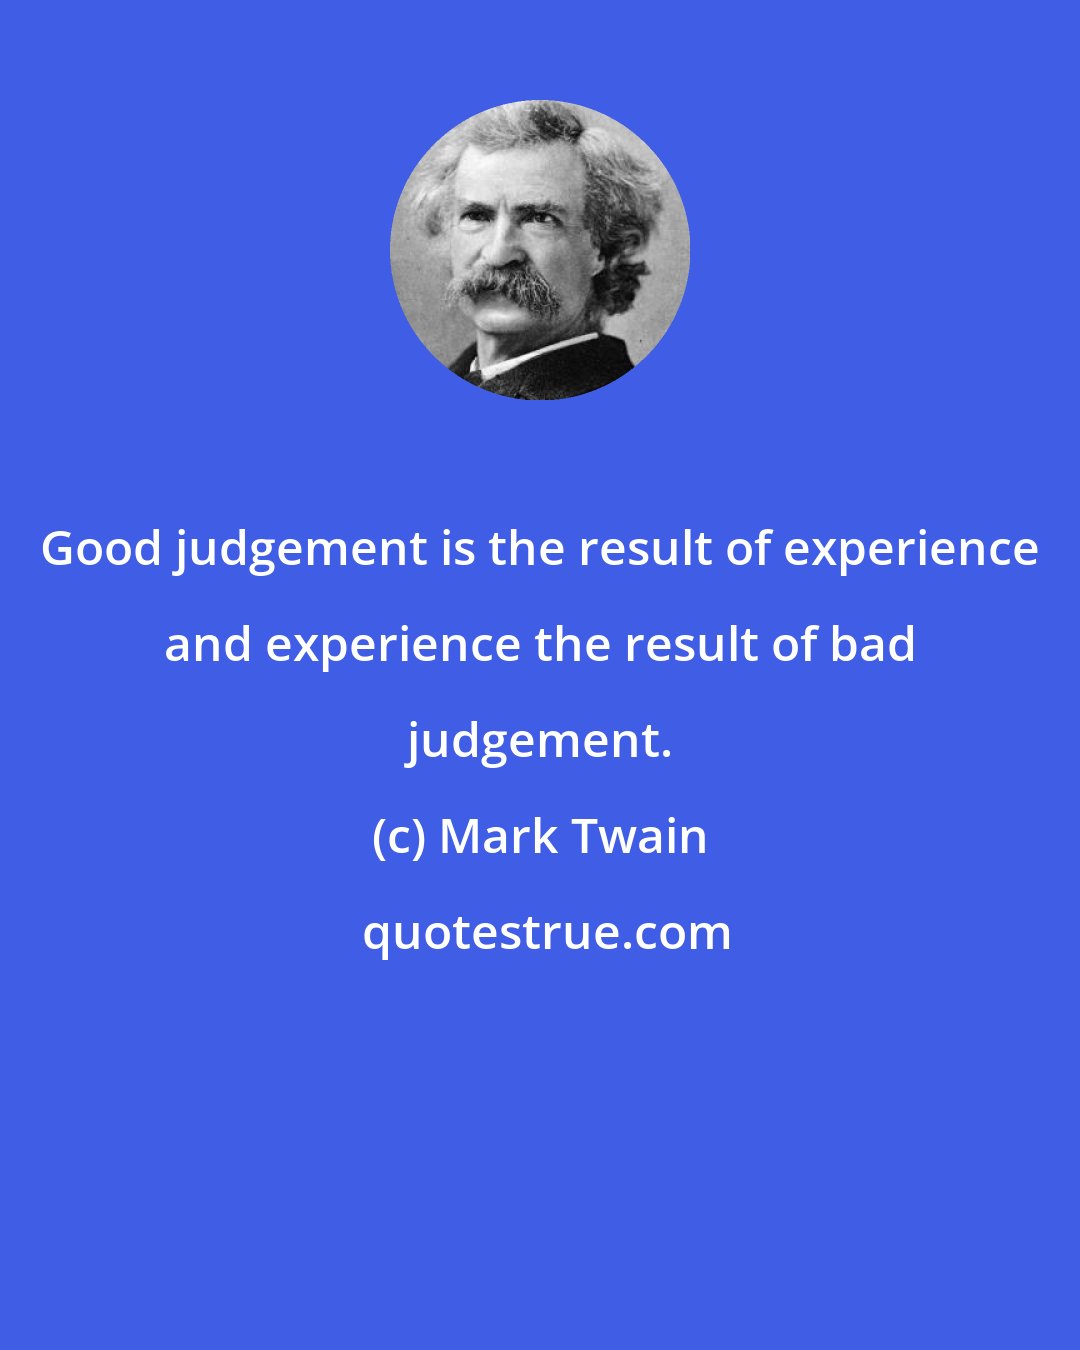 Mark Twain: Good judgement is the result of experience and experience the result of bad judgement.